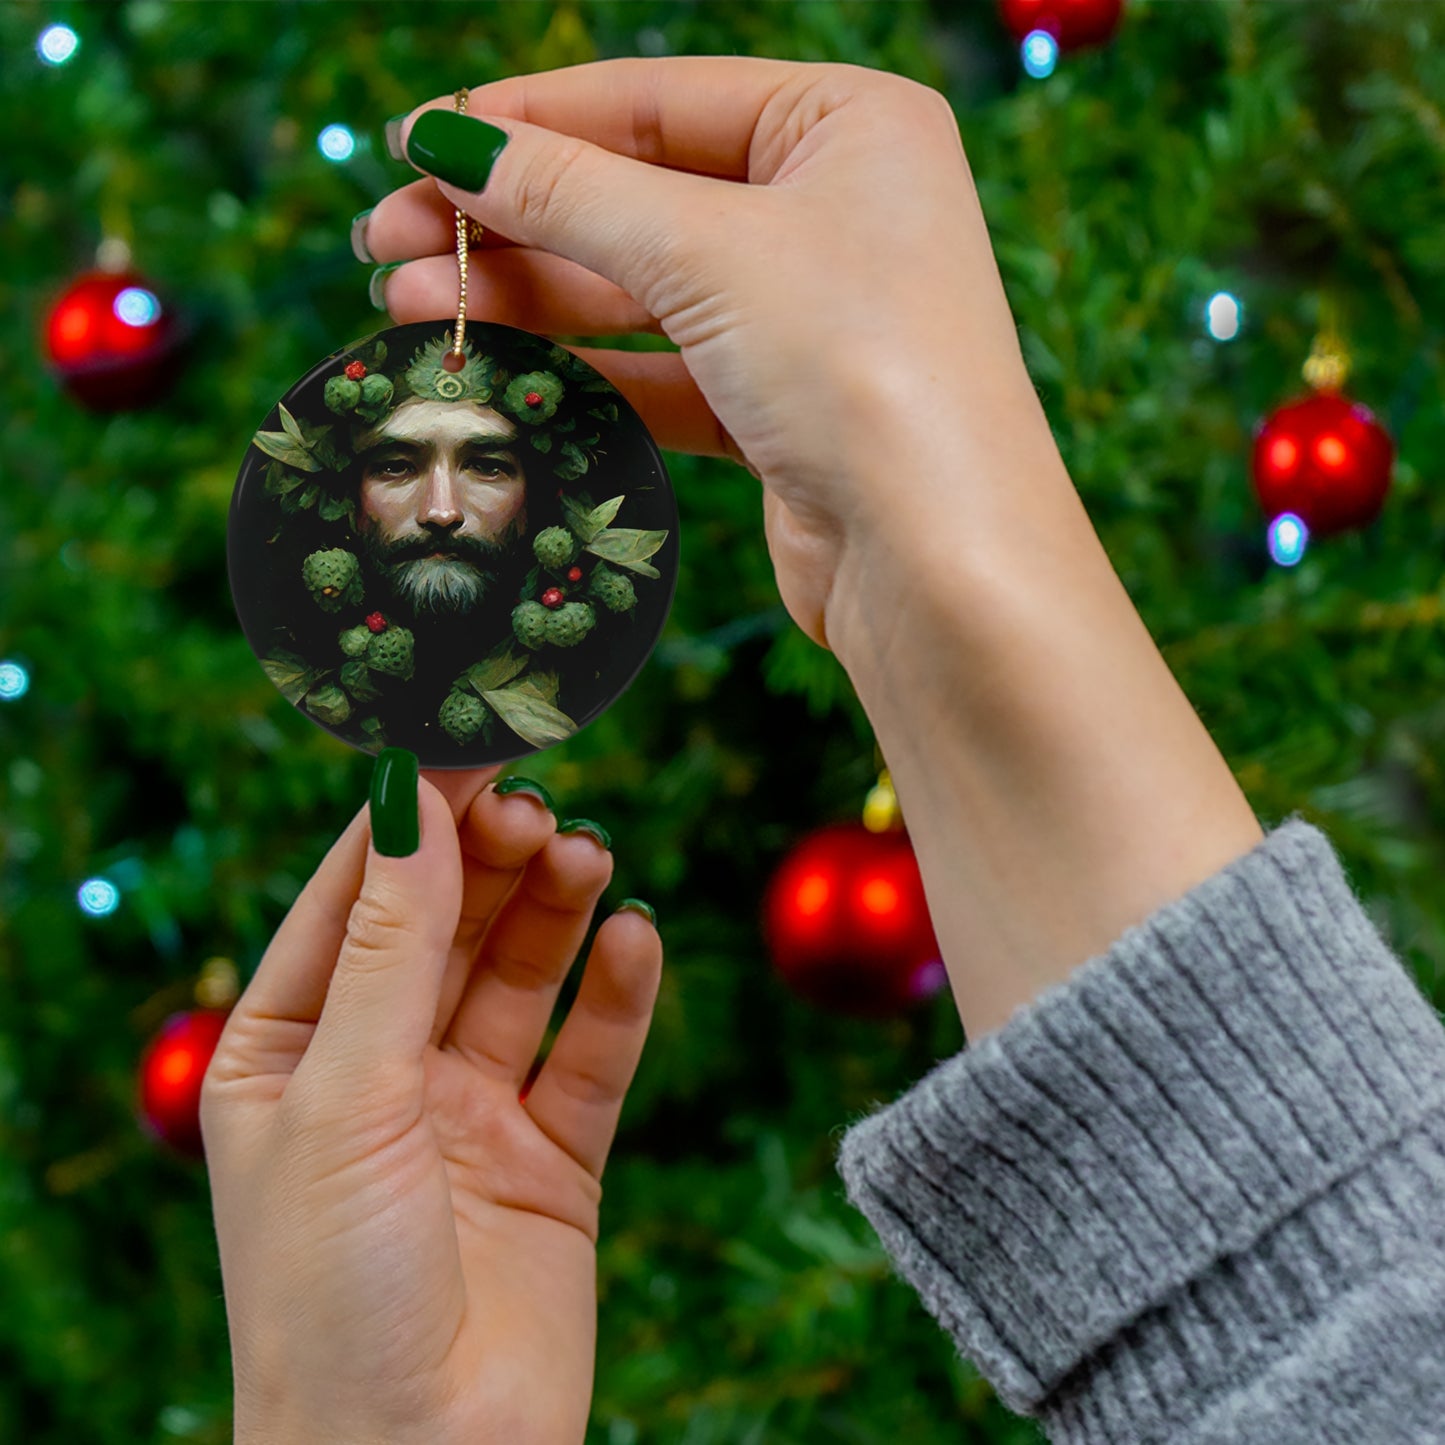 Witchy Yule Ornament - Green Man with holly berries Ornament - Blessed Yule! Ceramicornament for Yule Tree or Christmas Tree, pagan man gift